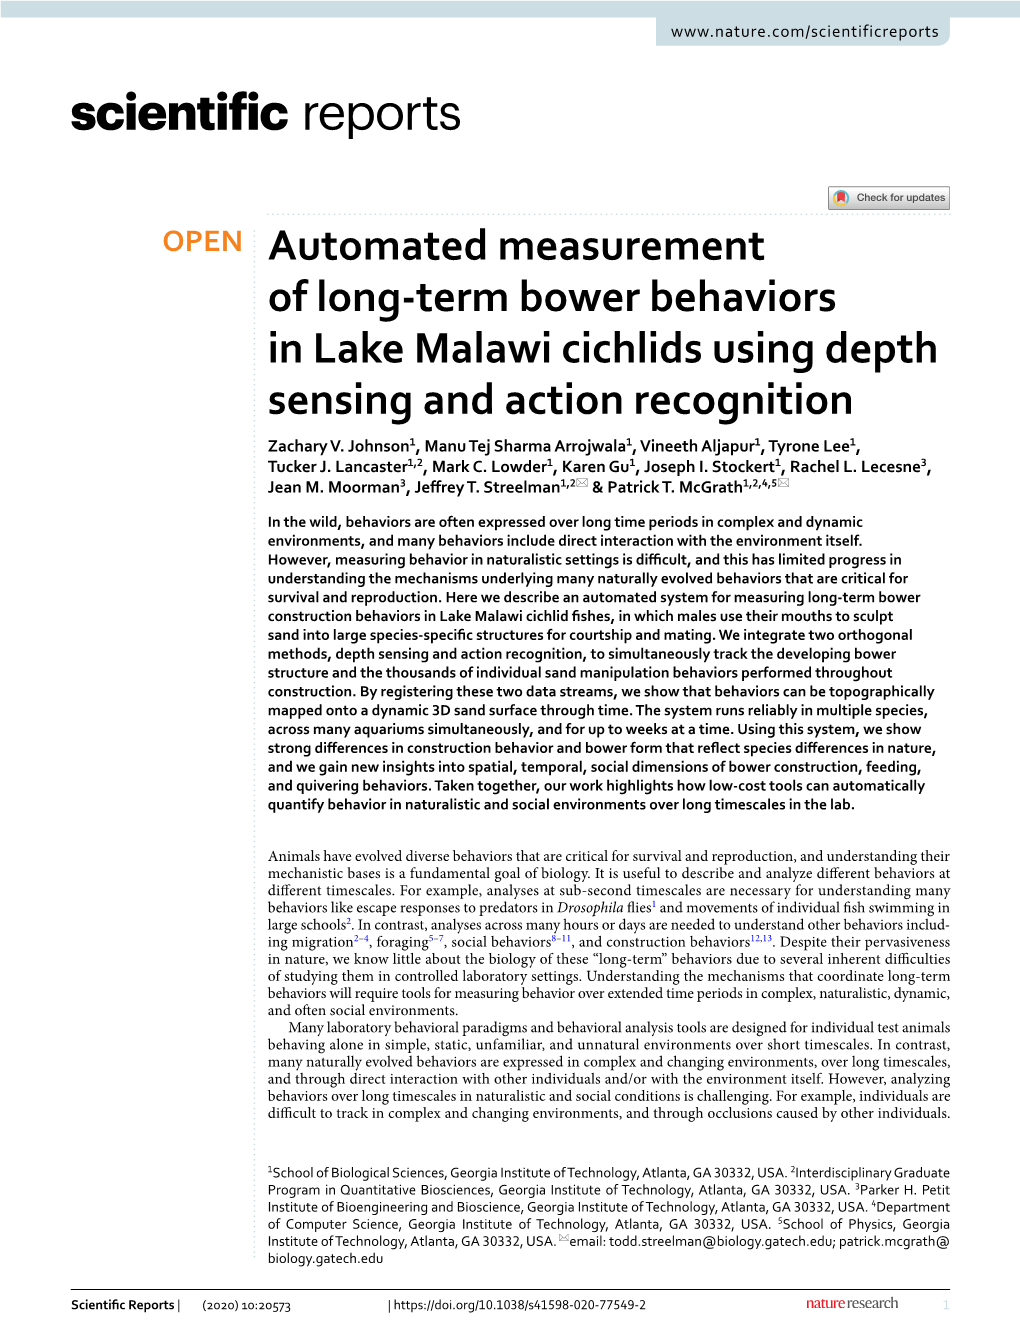 Automated Measurement of Long-Term Bower Behaviors in Lake Malawi